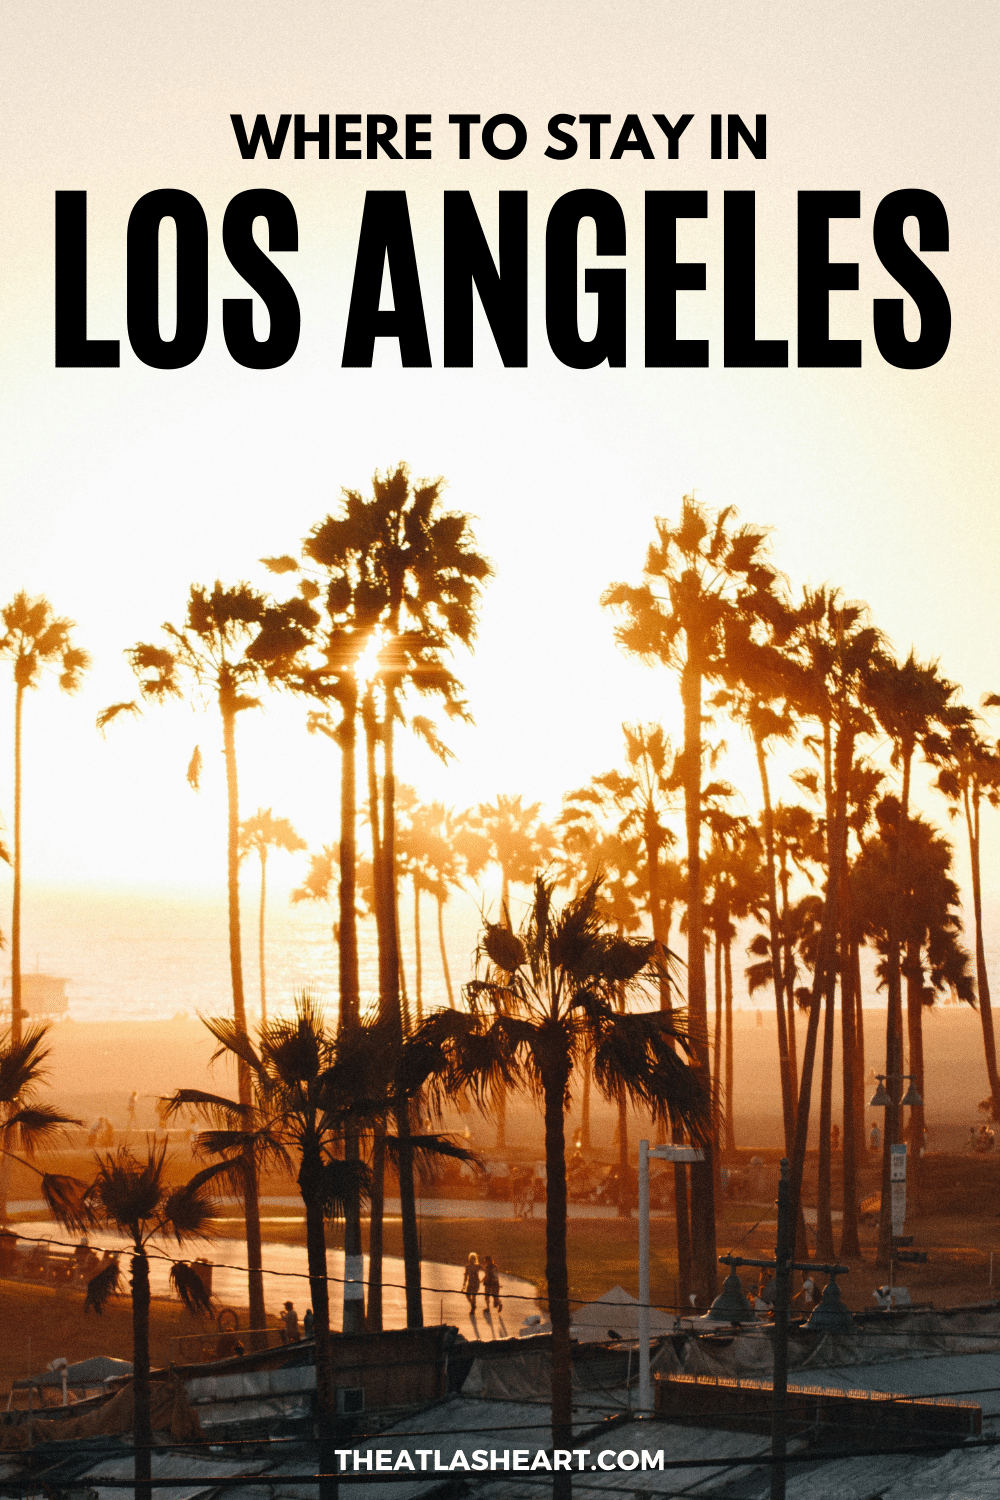 Where to Stay in Los Angeles: Best Hotels, Neighborhoods & Travel Tips